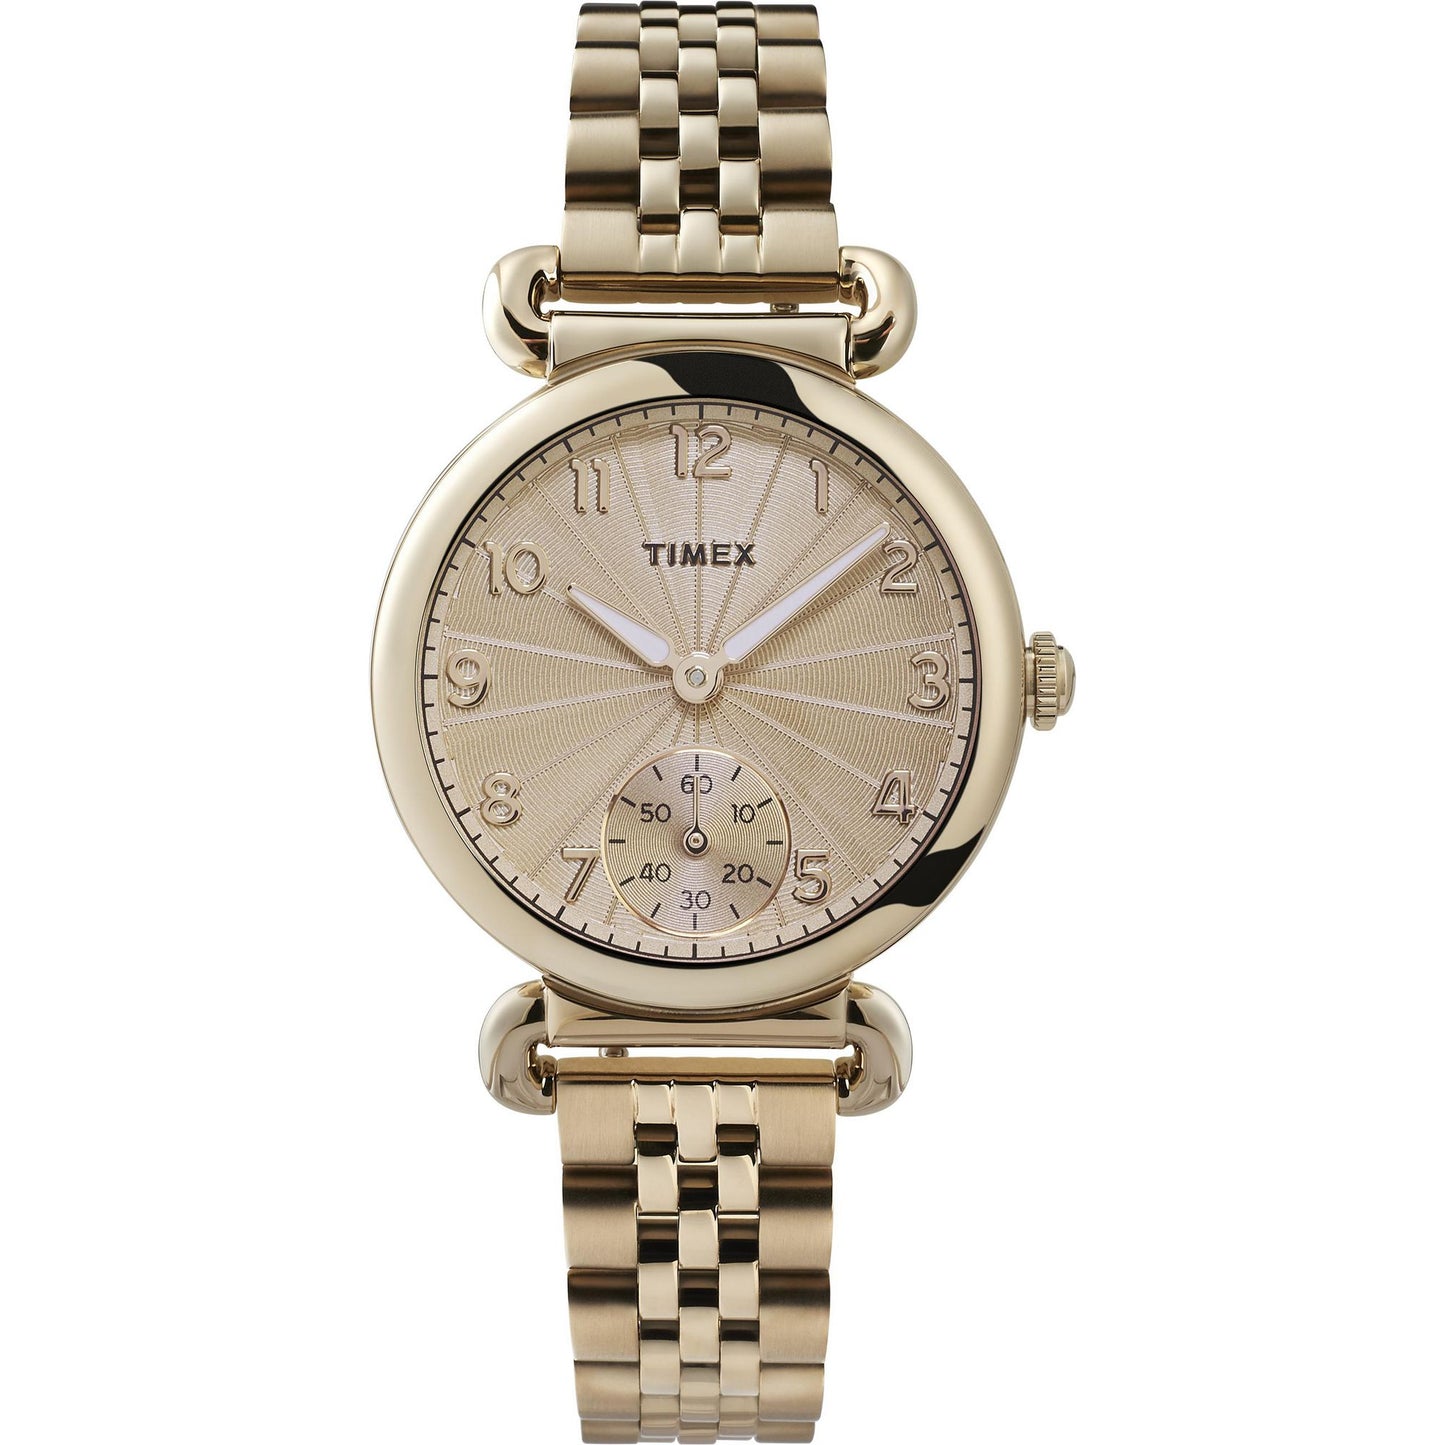 Timex Champagne Dial Analog Women Watch - TW2T88600